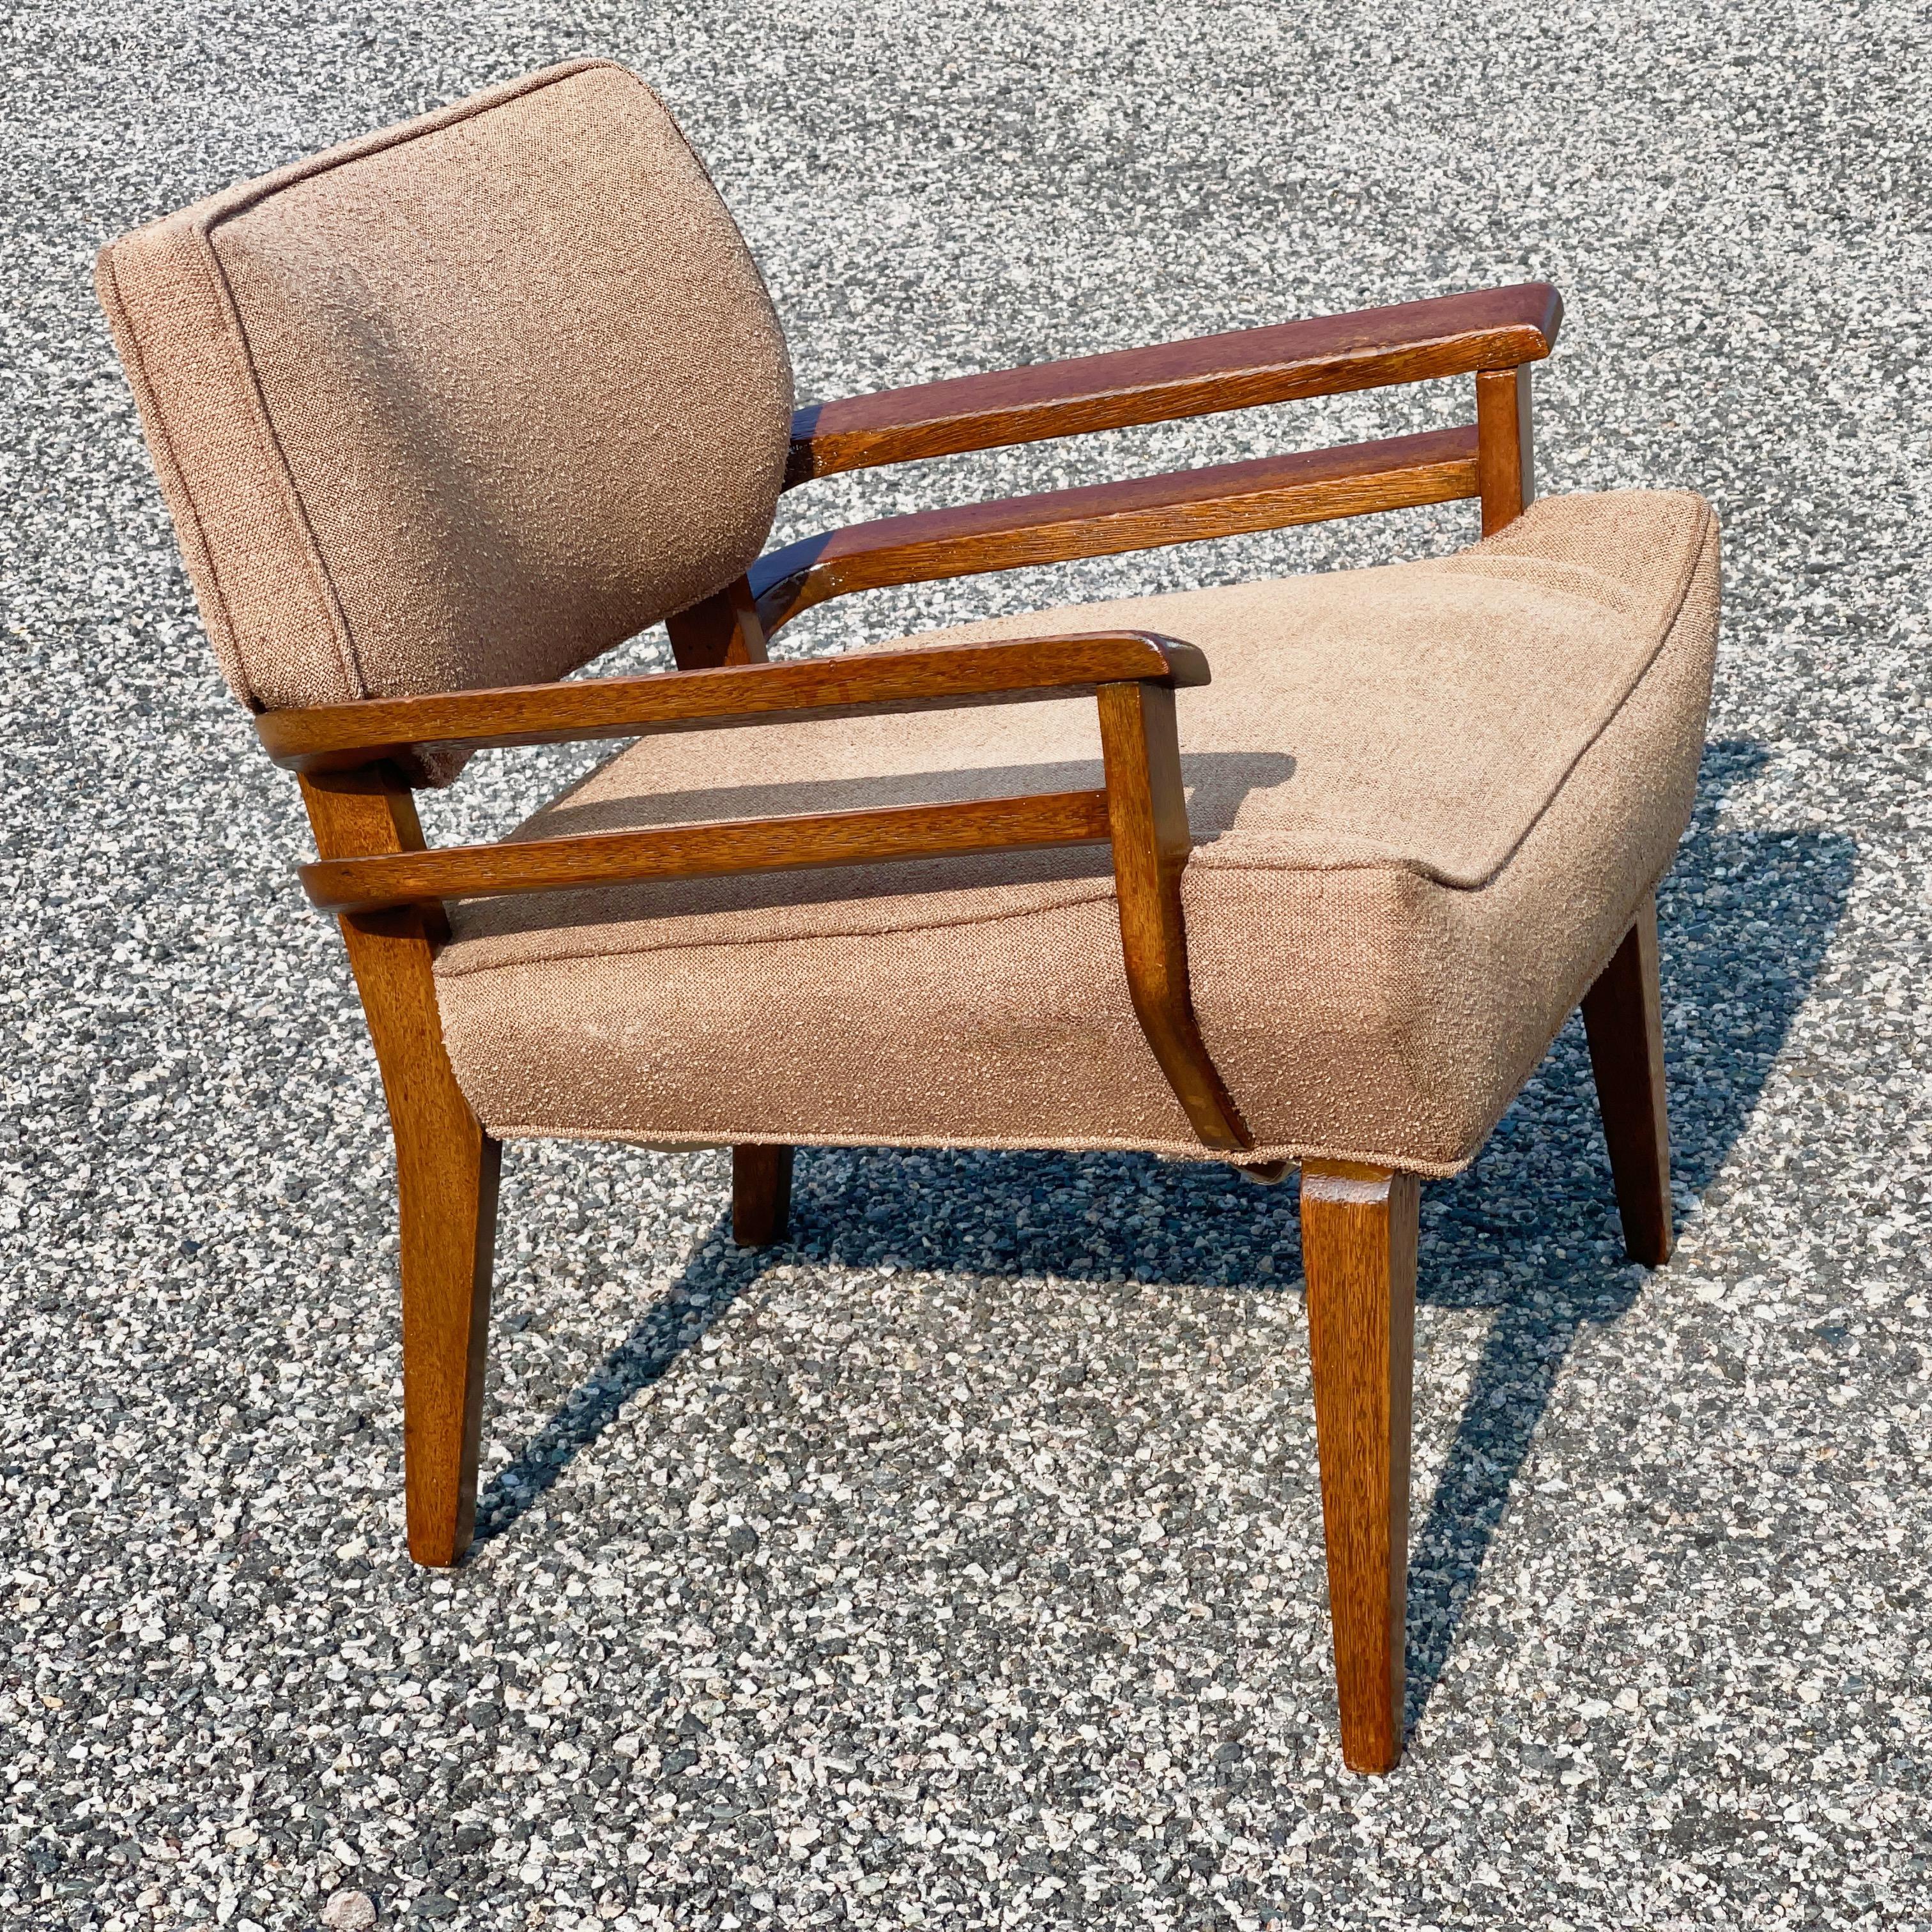 California modern chair designed by Paul Laszlo for Brown Saltman.  Oak frame with distinctive double armrests.  Tightened and refinished.  Awaiting your recovering. 